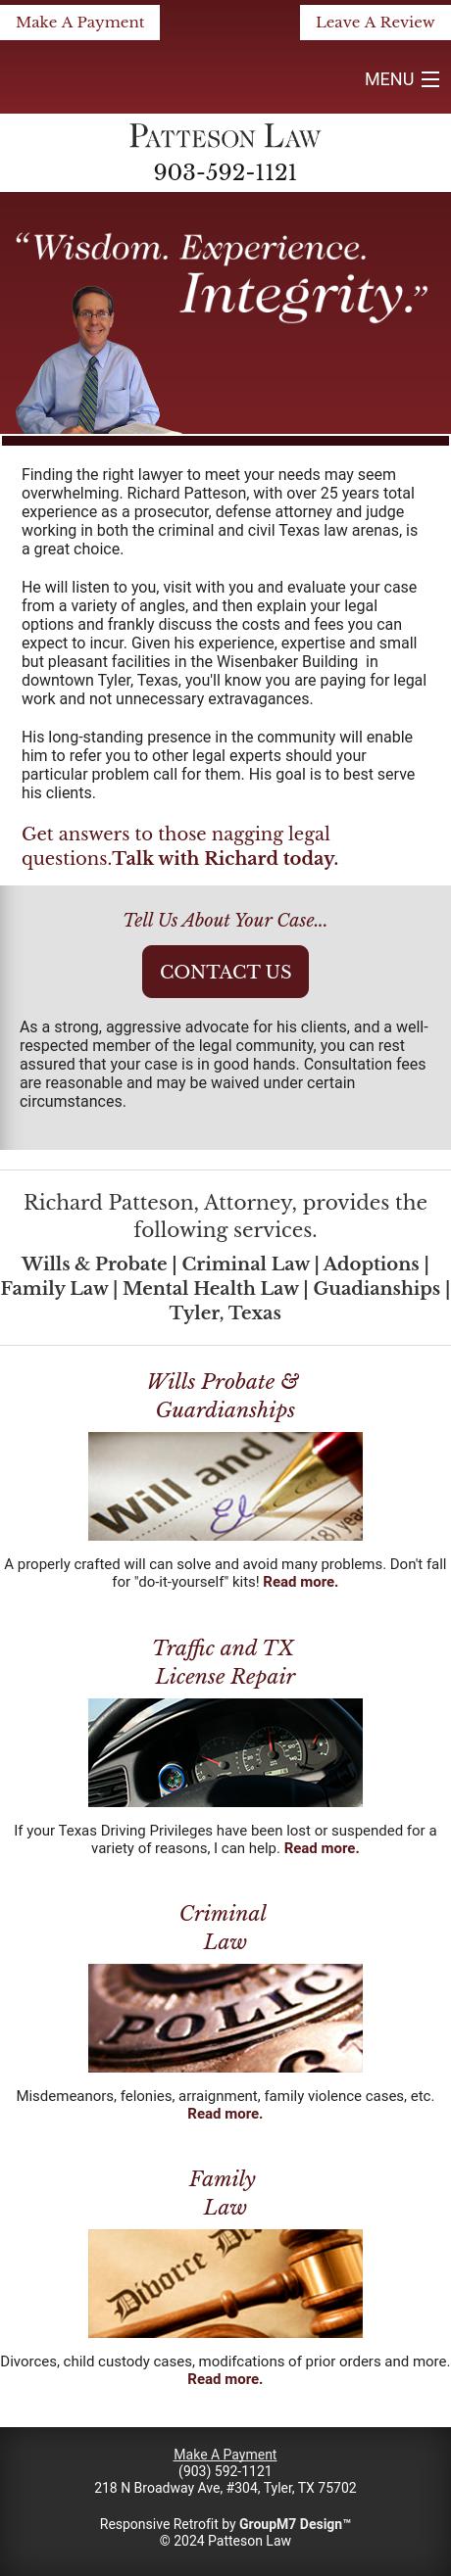 Richard Patteson Attorney At Law - Tyler TX Lawyers